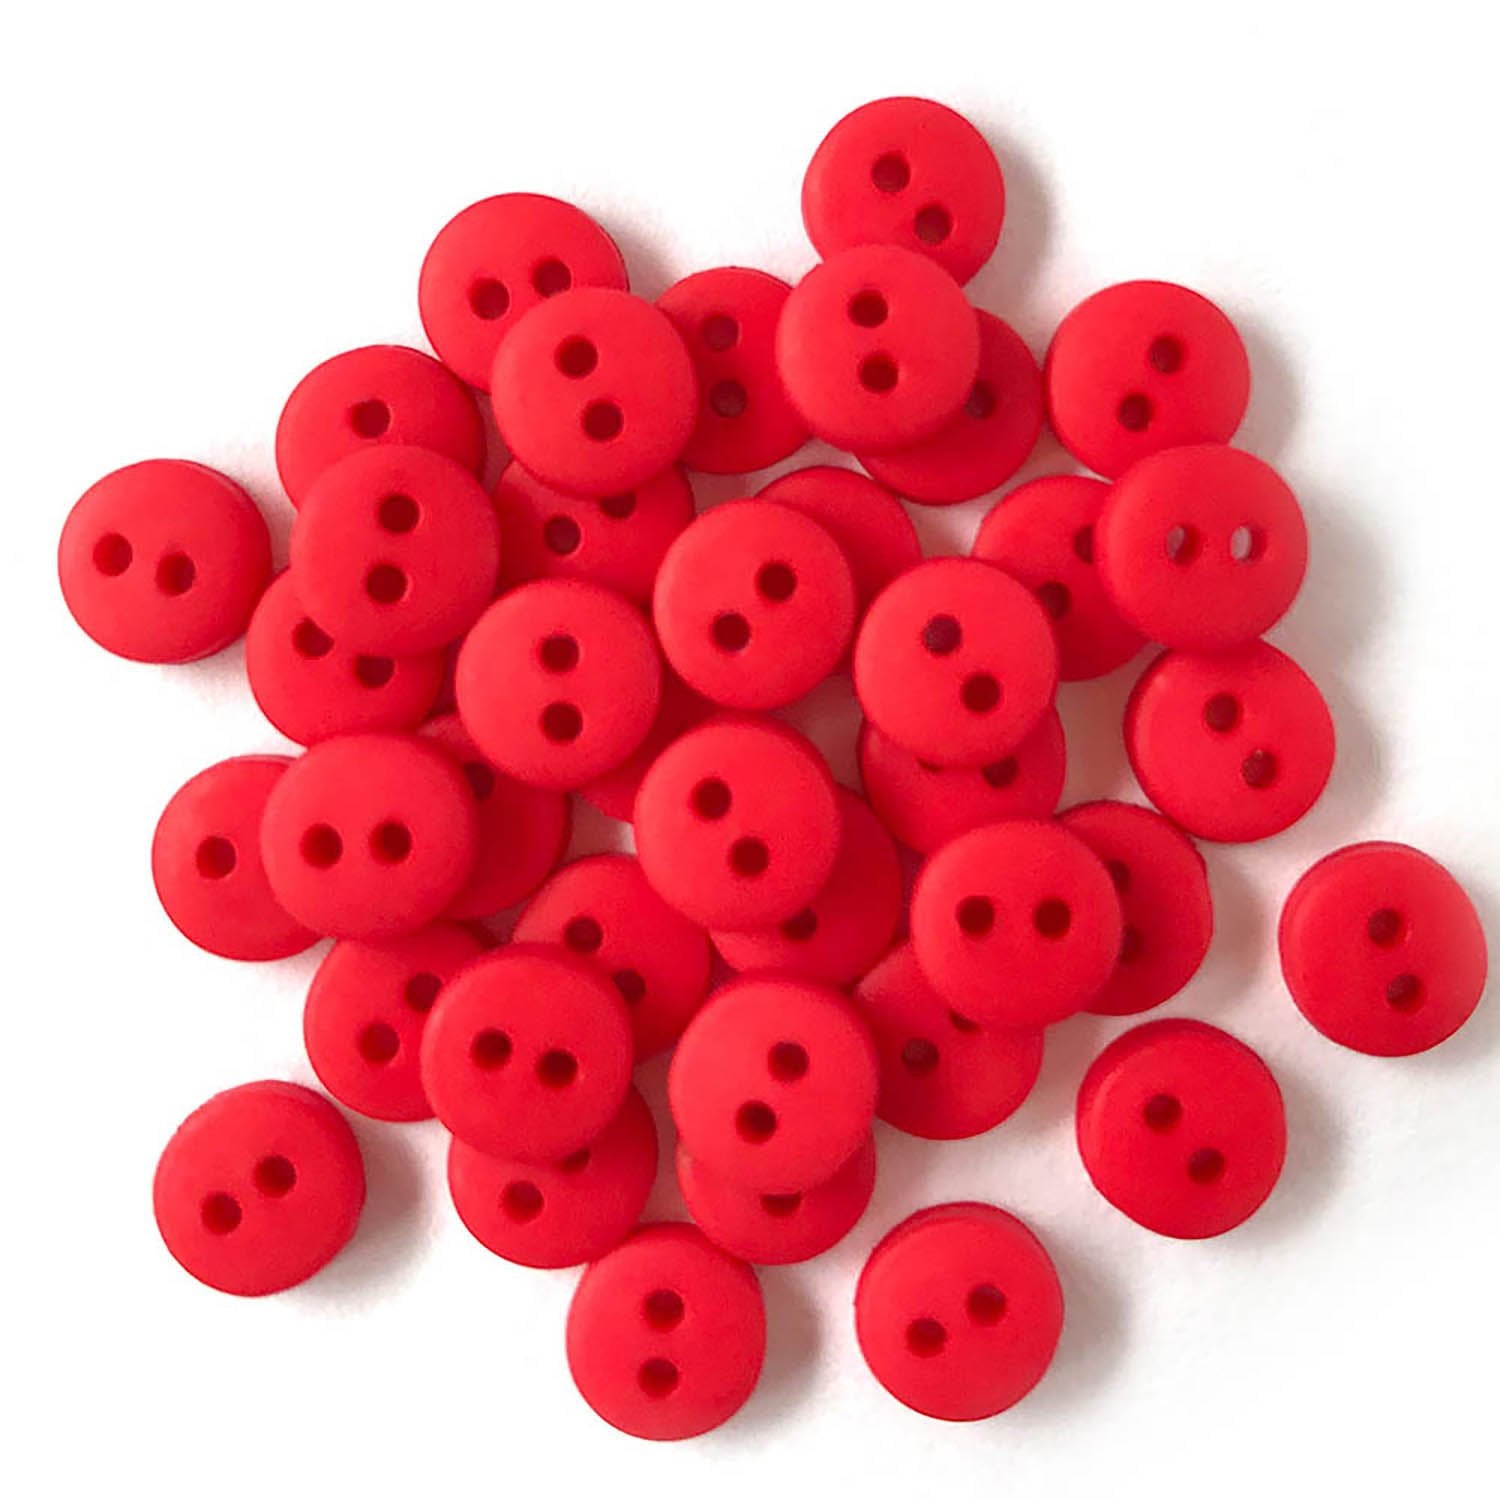 Red buttons stock photo. Image of crafts, shiny, design - 12674846